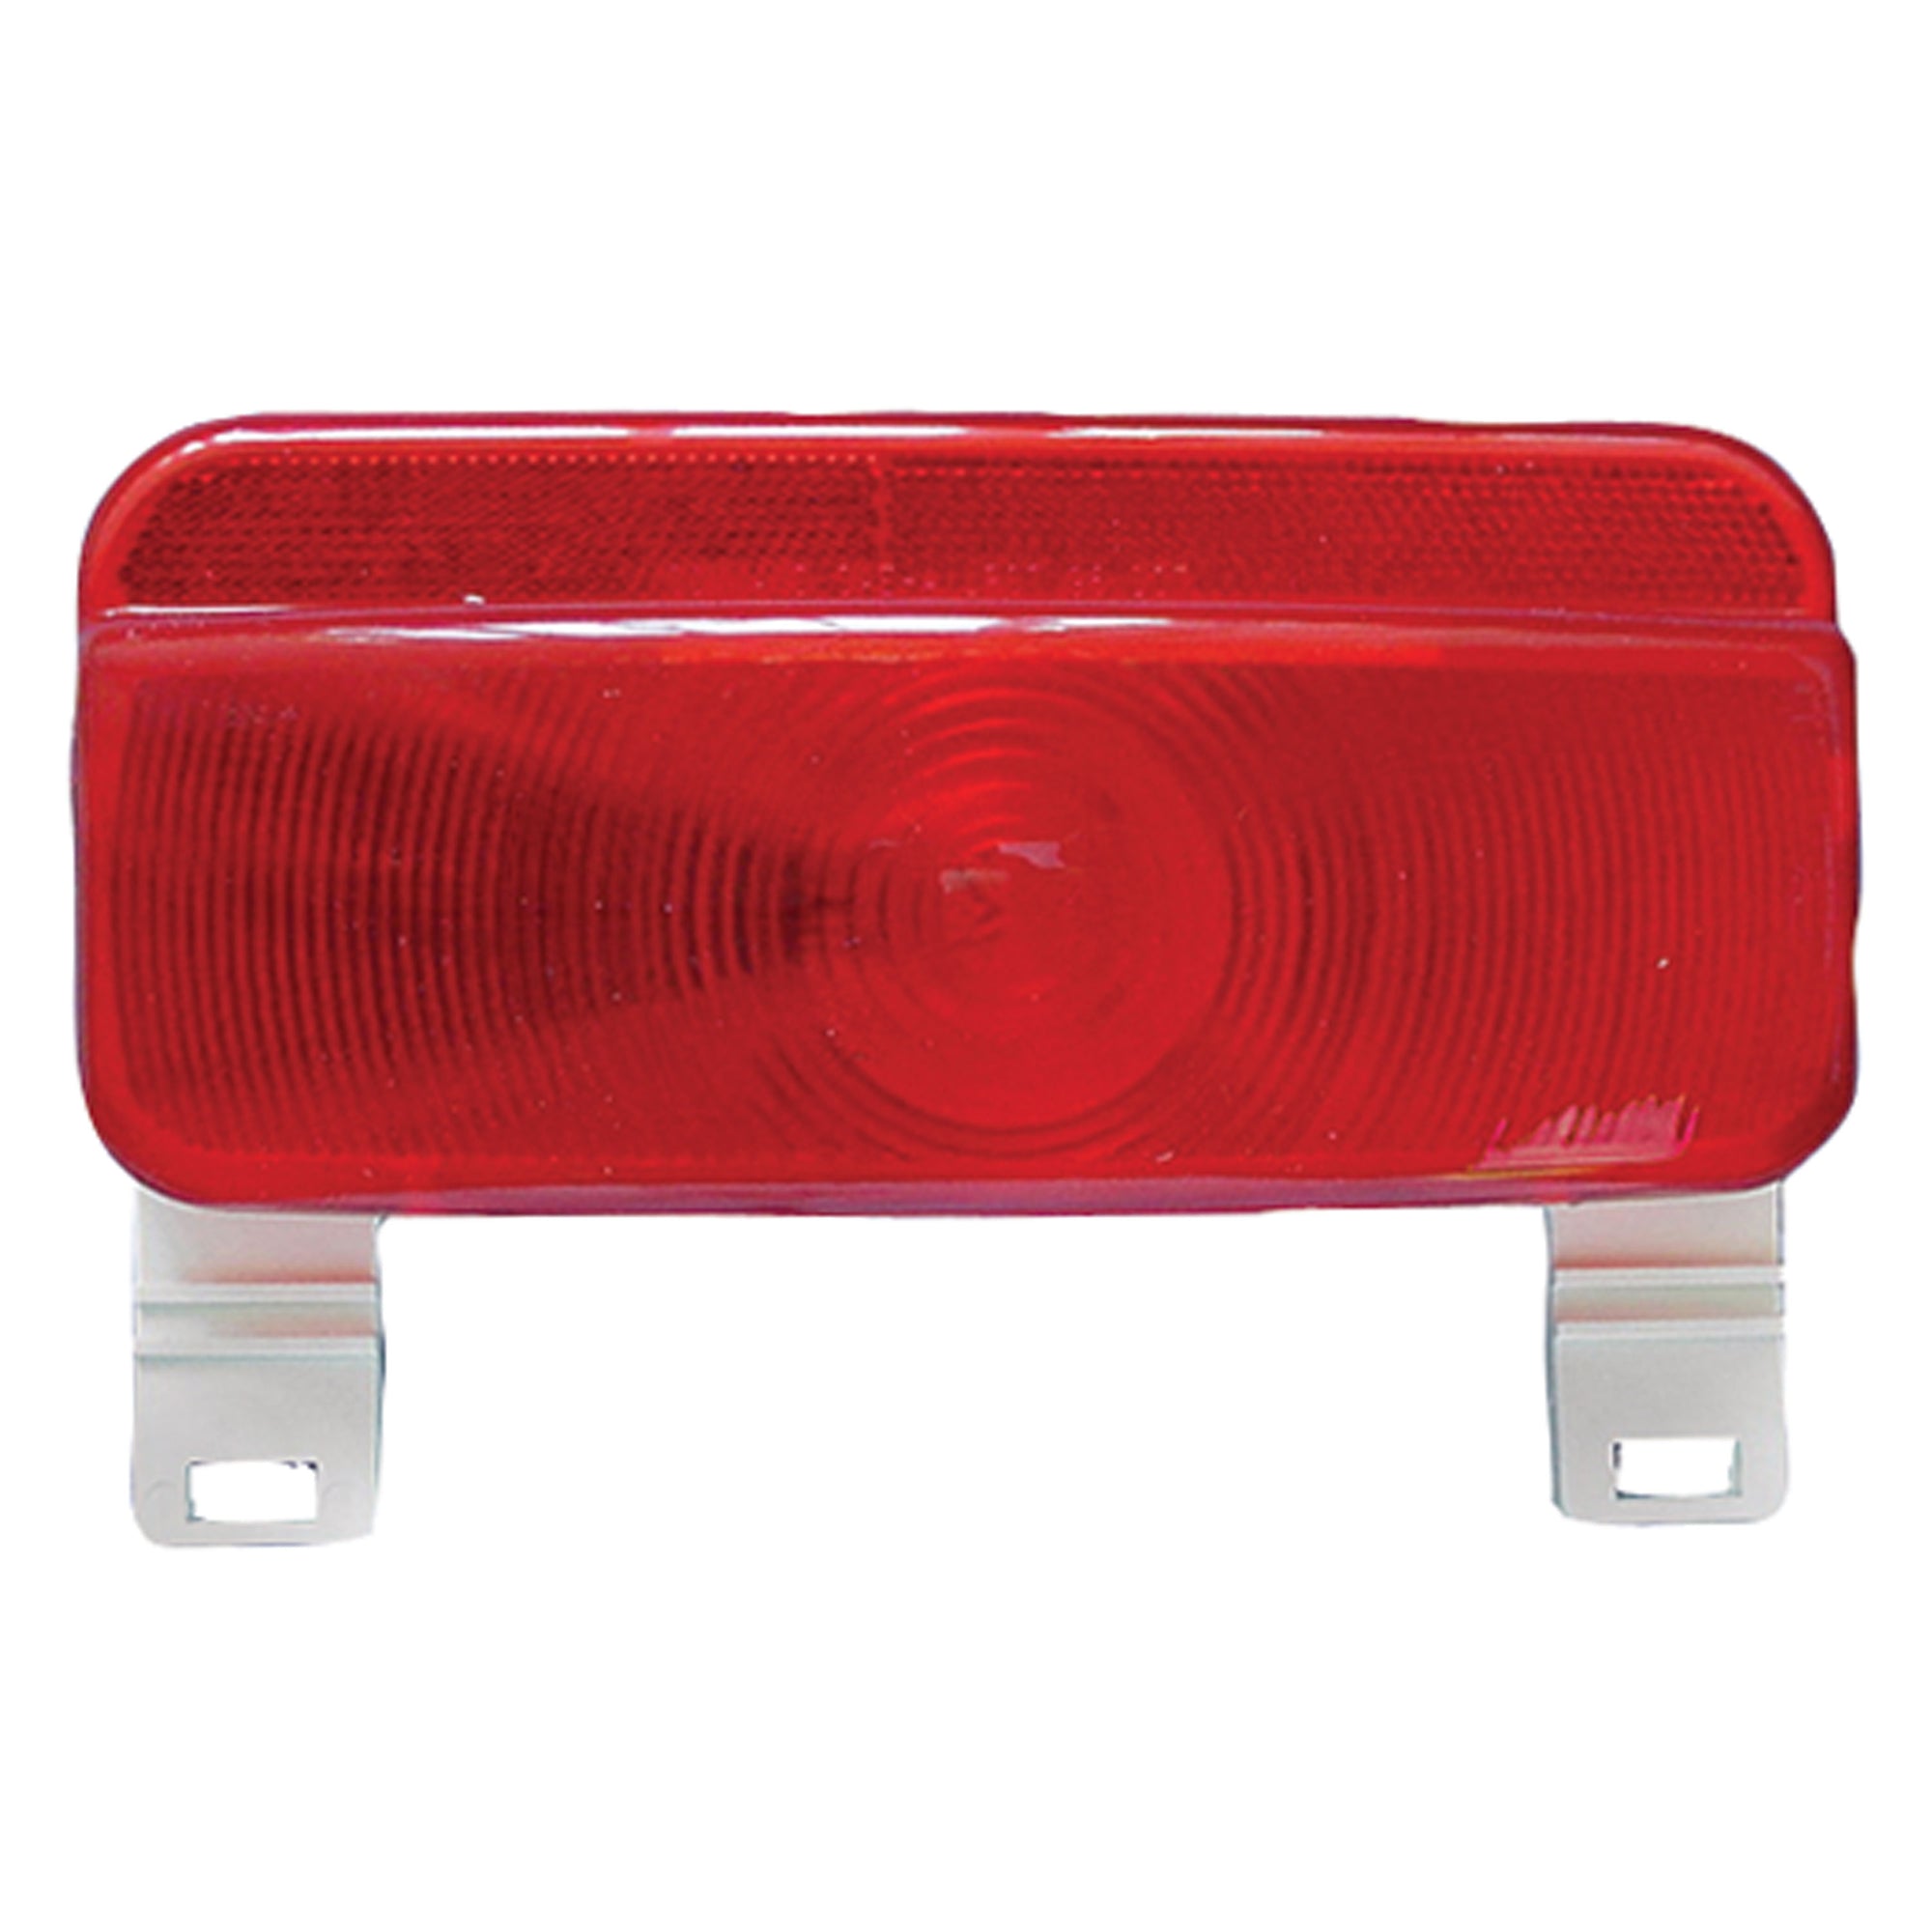 Fasteners Unlimited 003-81L Command Electronics Surface Mount 12 Volt Taillight - White Base And License Bracket, Packaged